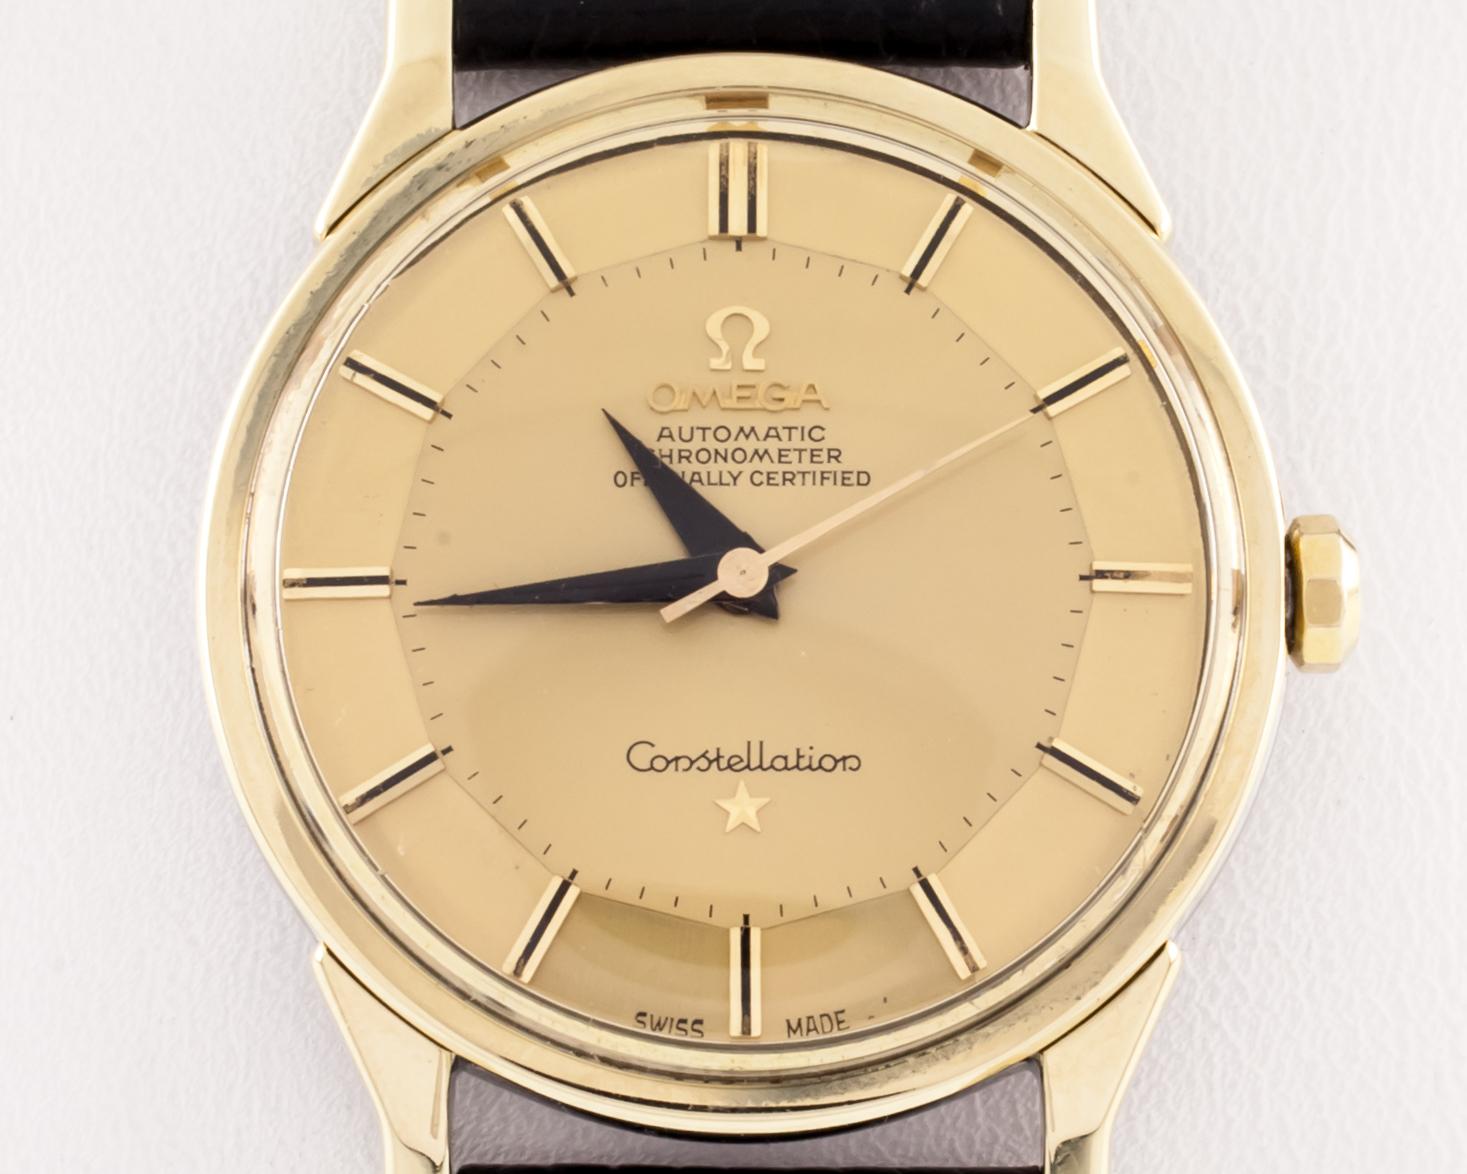 Omega Gold-Plated Vintage Constellation w/ Gold Pie Pan Dial 167005
Model: Constellation 
Model #167-005
Serial #25609113
Production Year: 1967
Gold-capped Stainless Steel Round Case w/ 